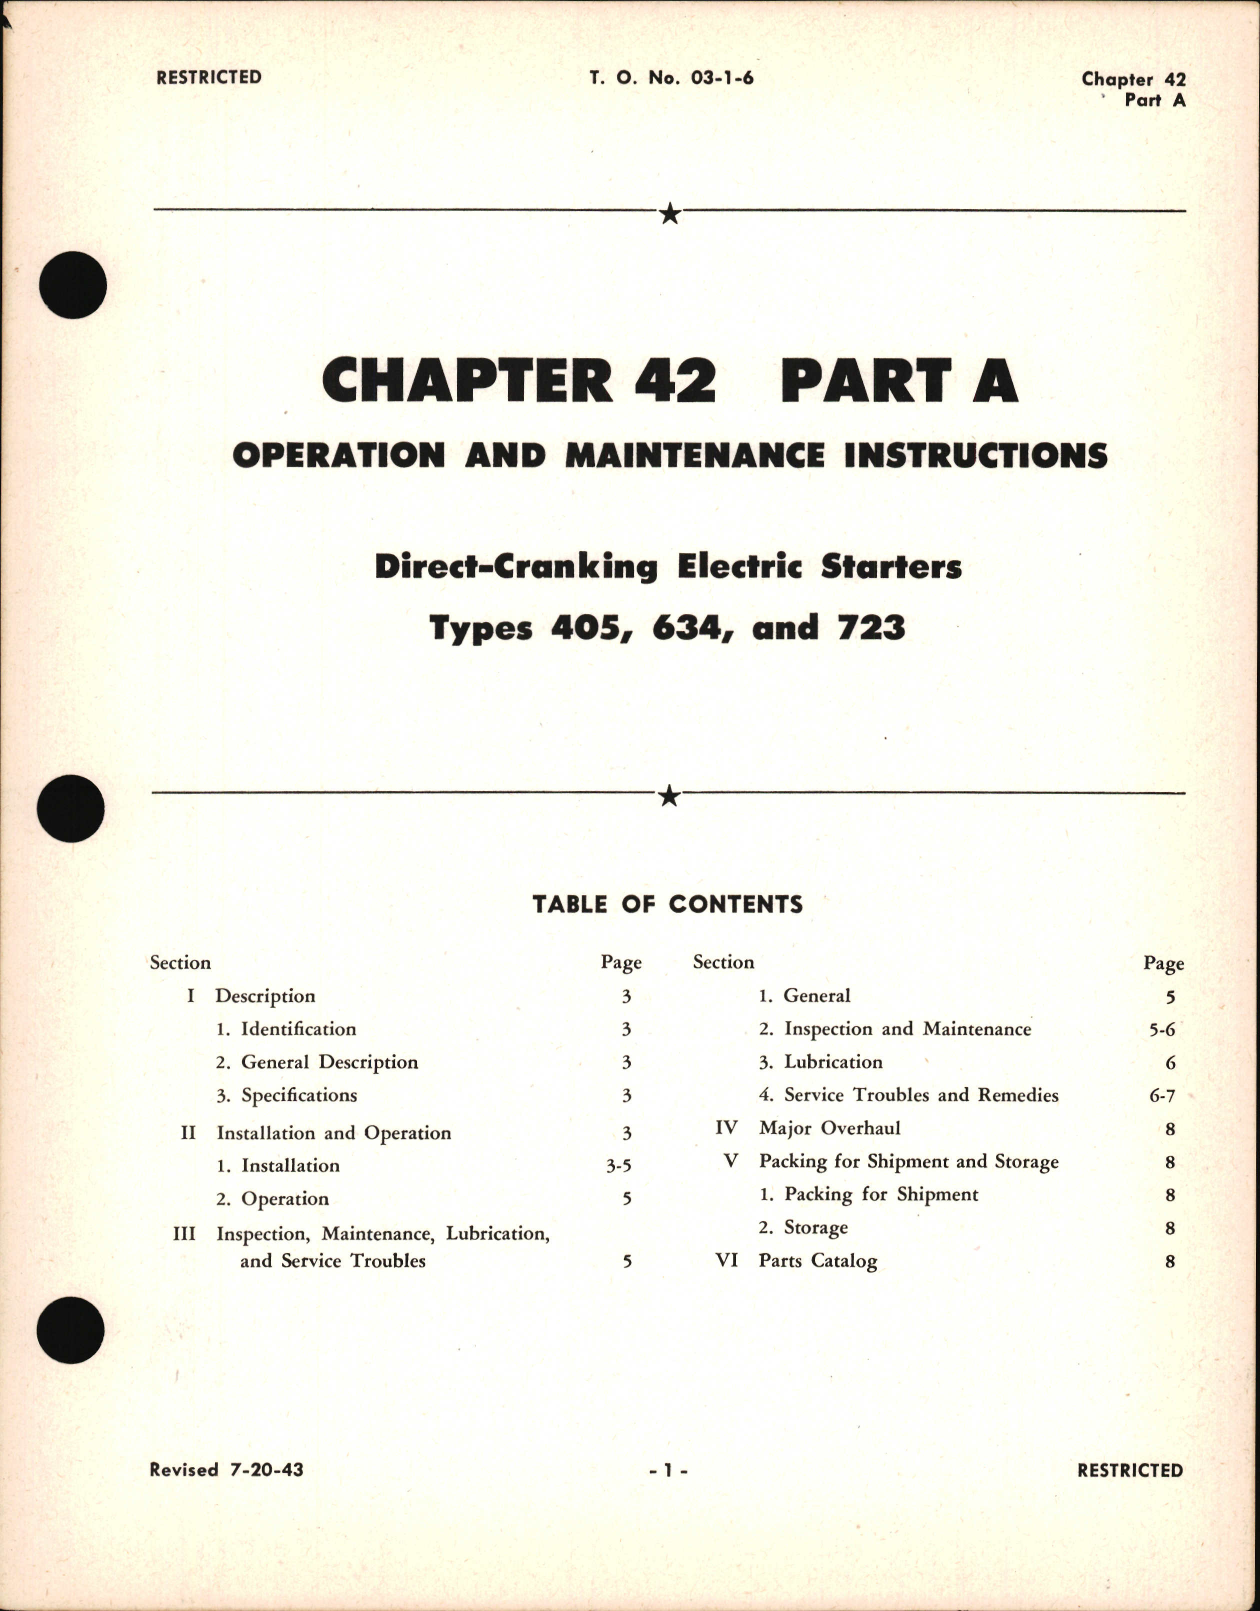 Sample page 1 from AirCorps Library document: Operation and Maintenance Instructions for Direct Cranking Electric Starters, Chapter 42 Part A